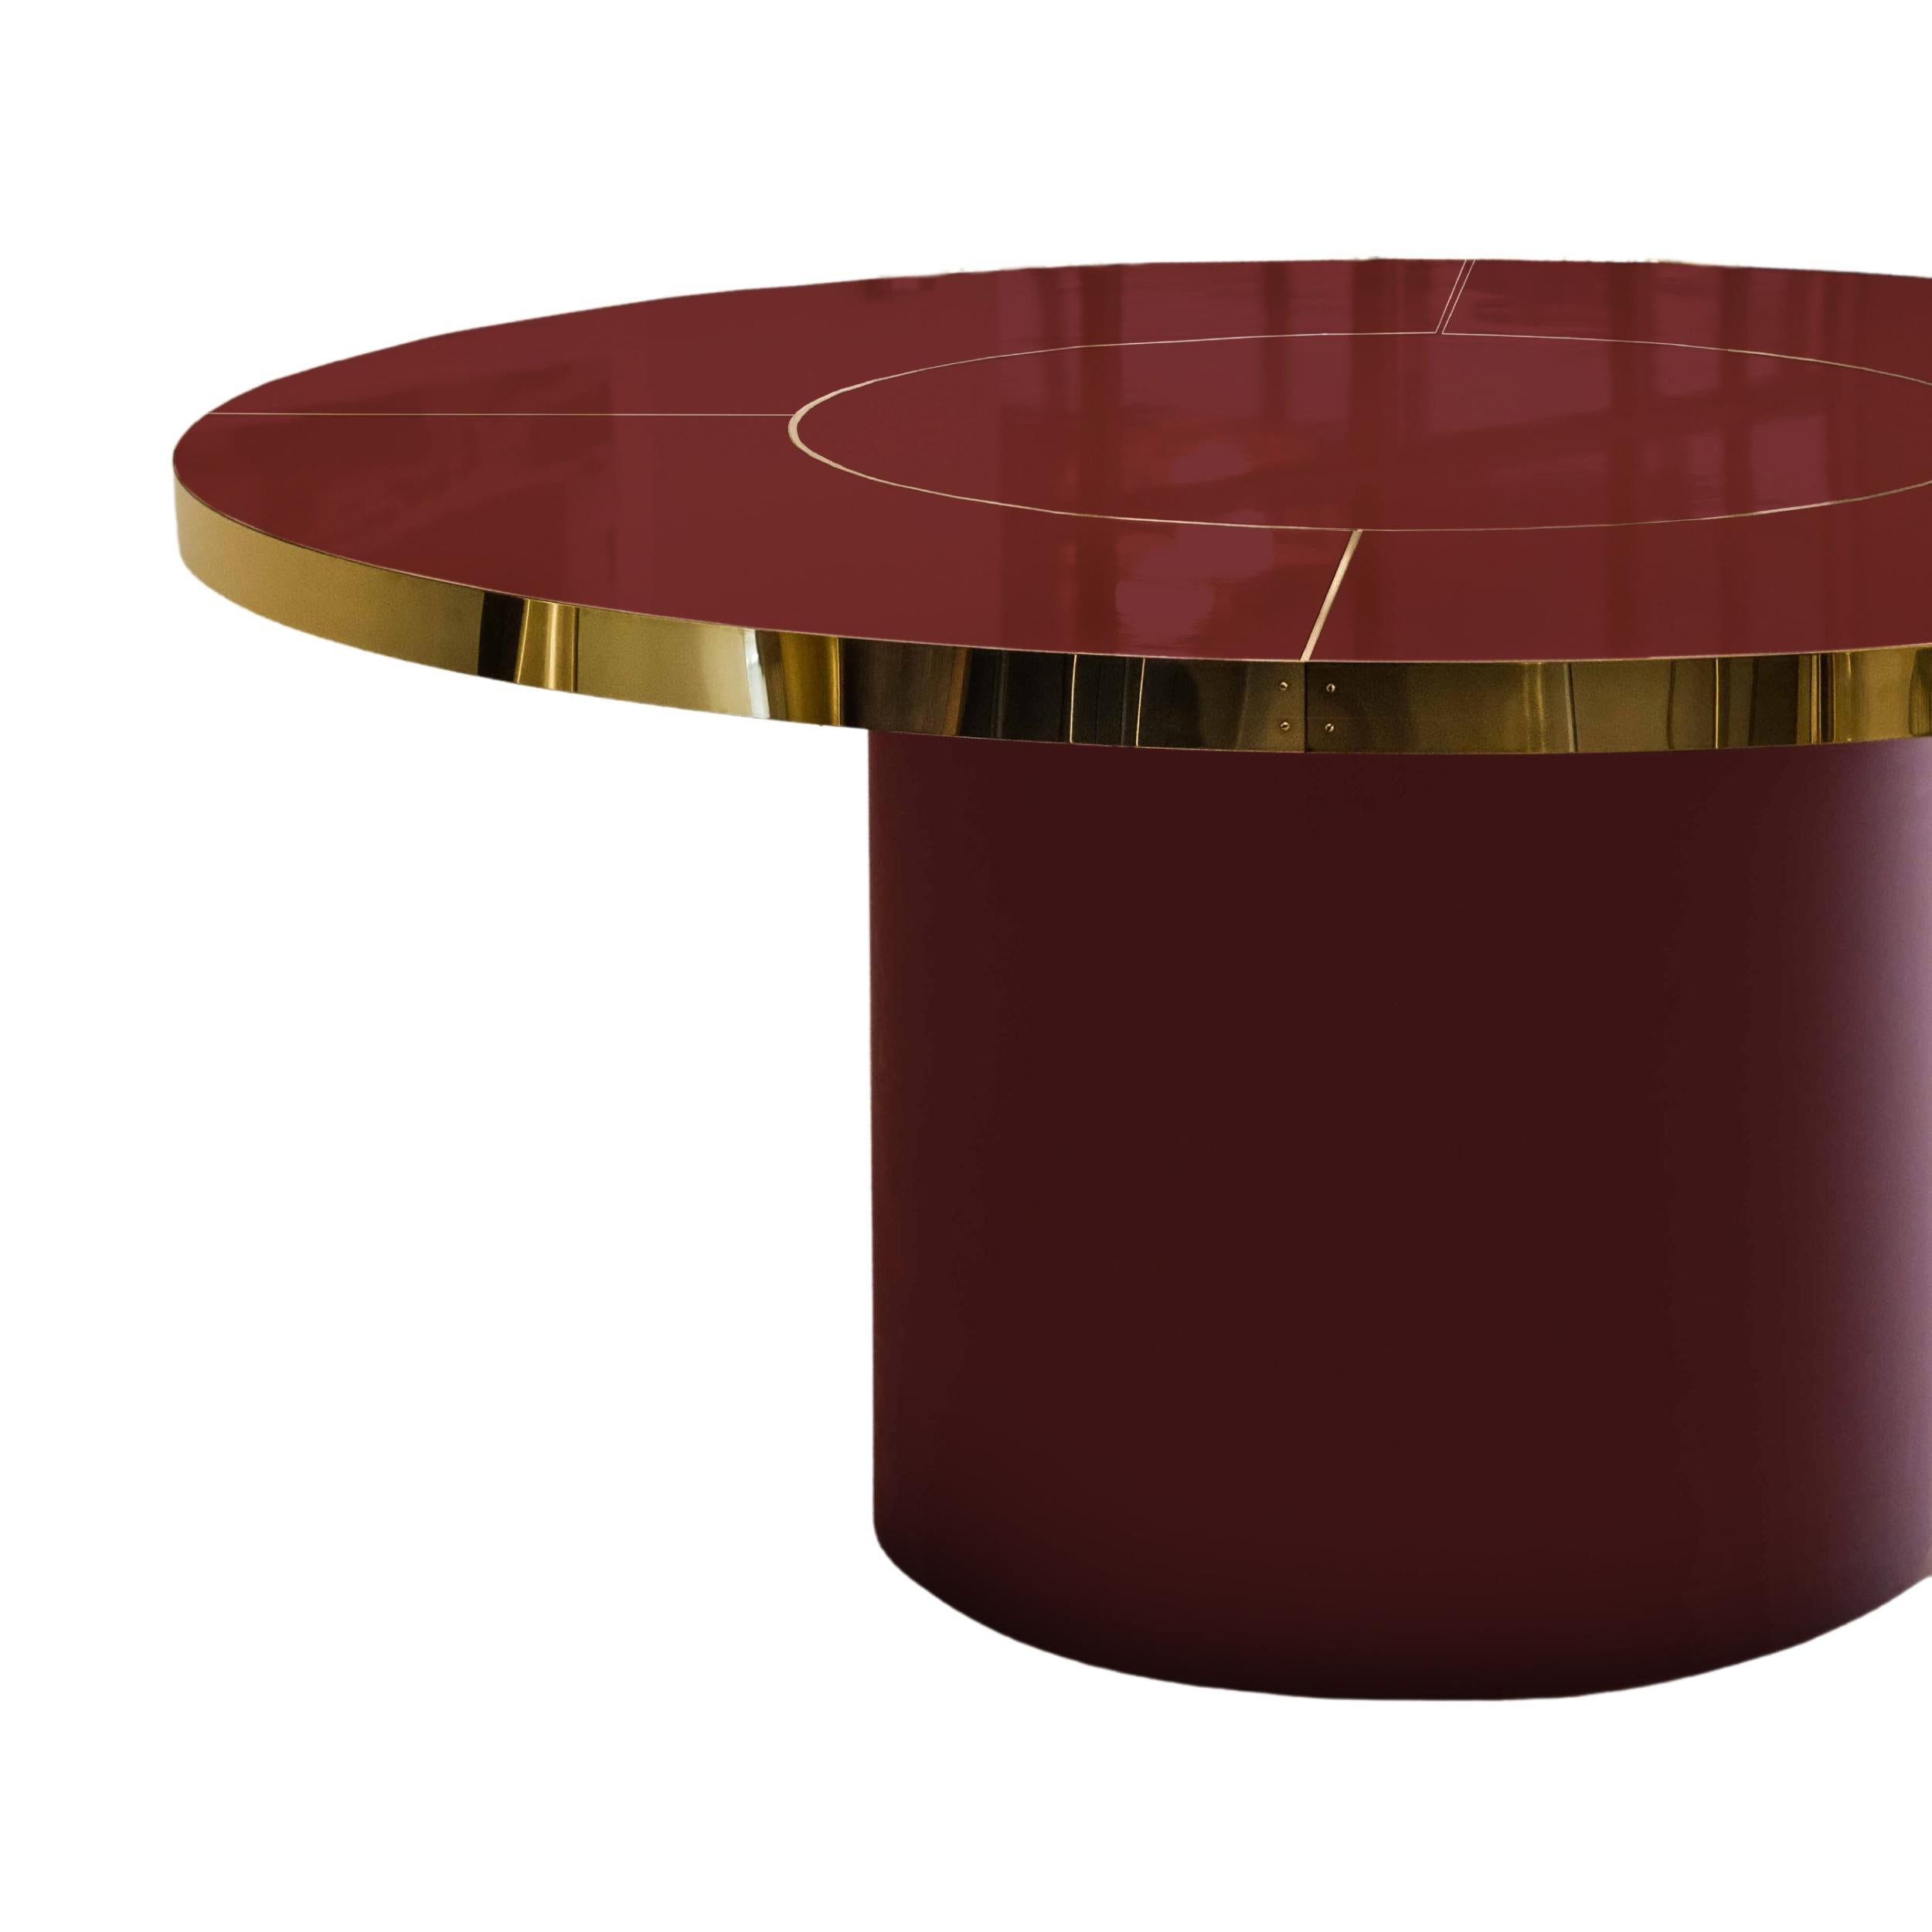 Retro Design Round Dining Table Palm Springs Style High Gloss Laminated & Brass Details Extra L Size

Discover our incredible collection of retro-style design tables inspired by the iconic decoration of the 1950s, 60s, and 70s of Palm Springs in